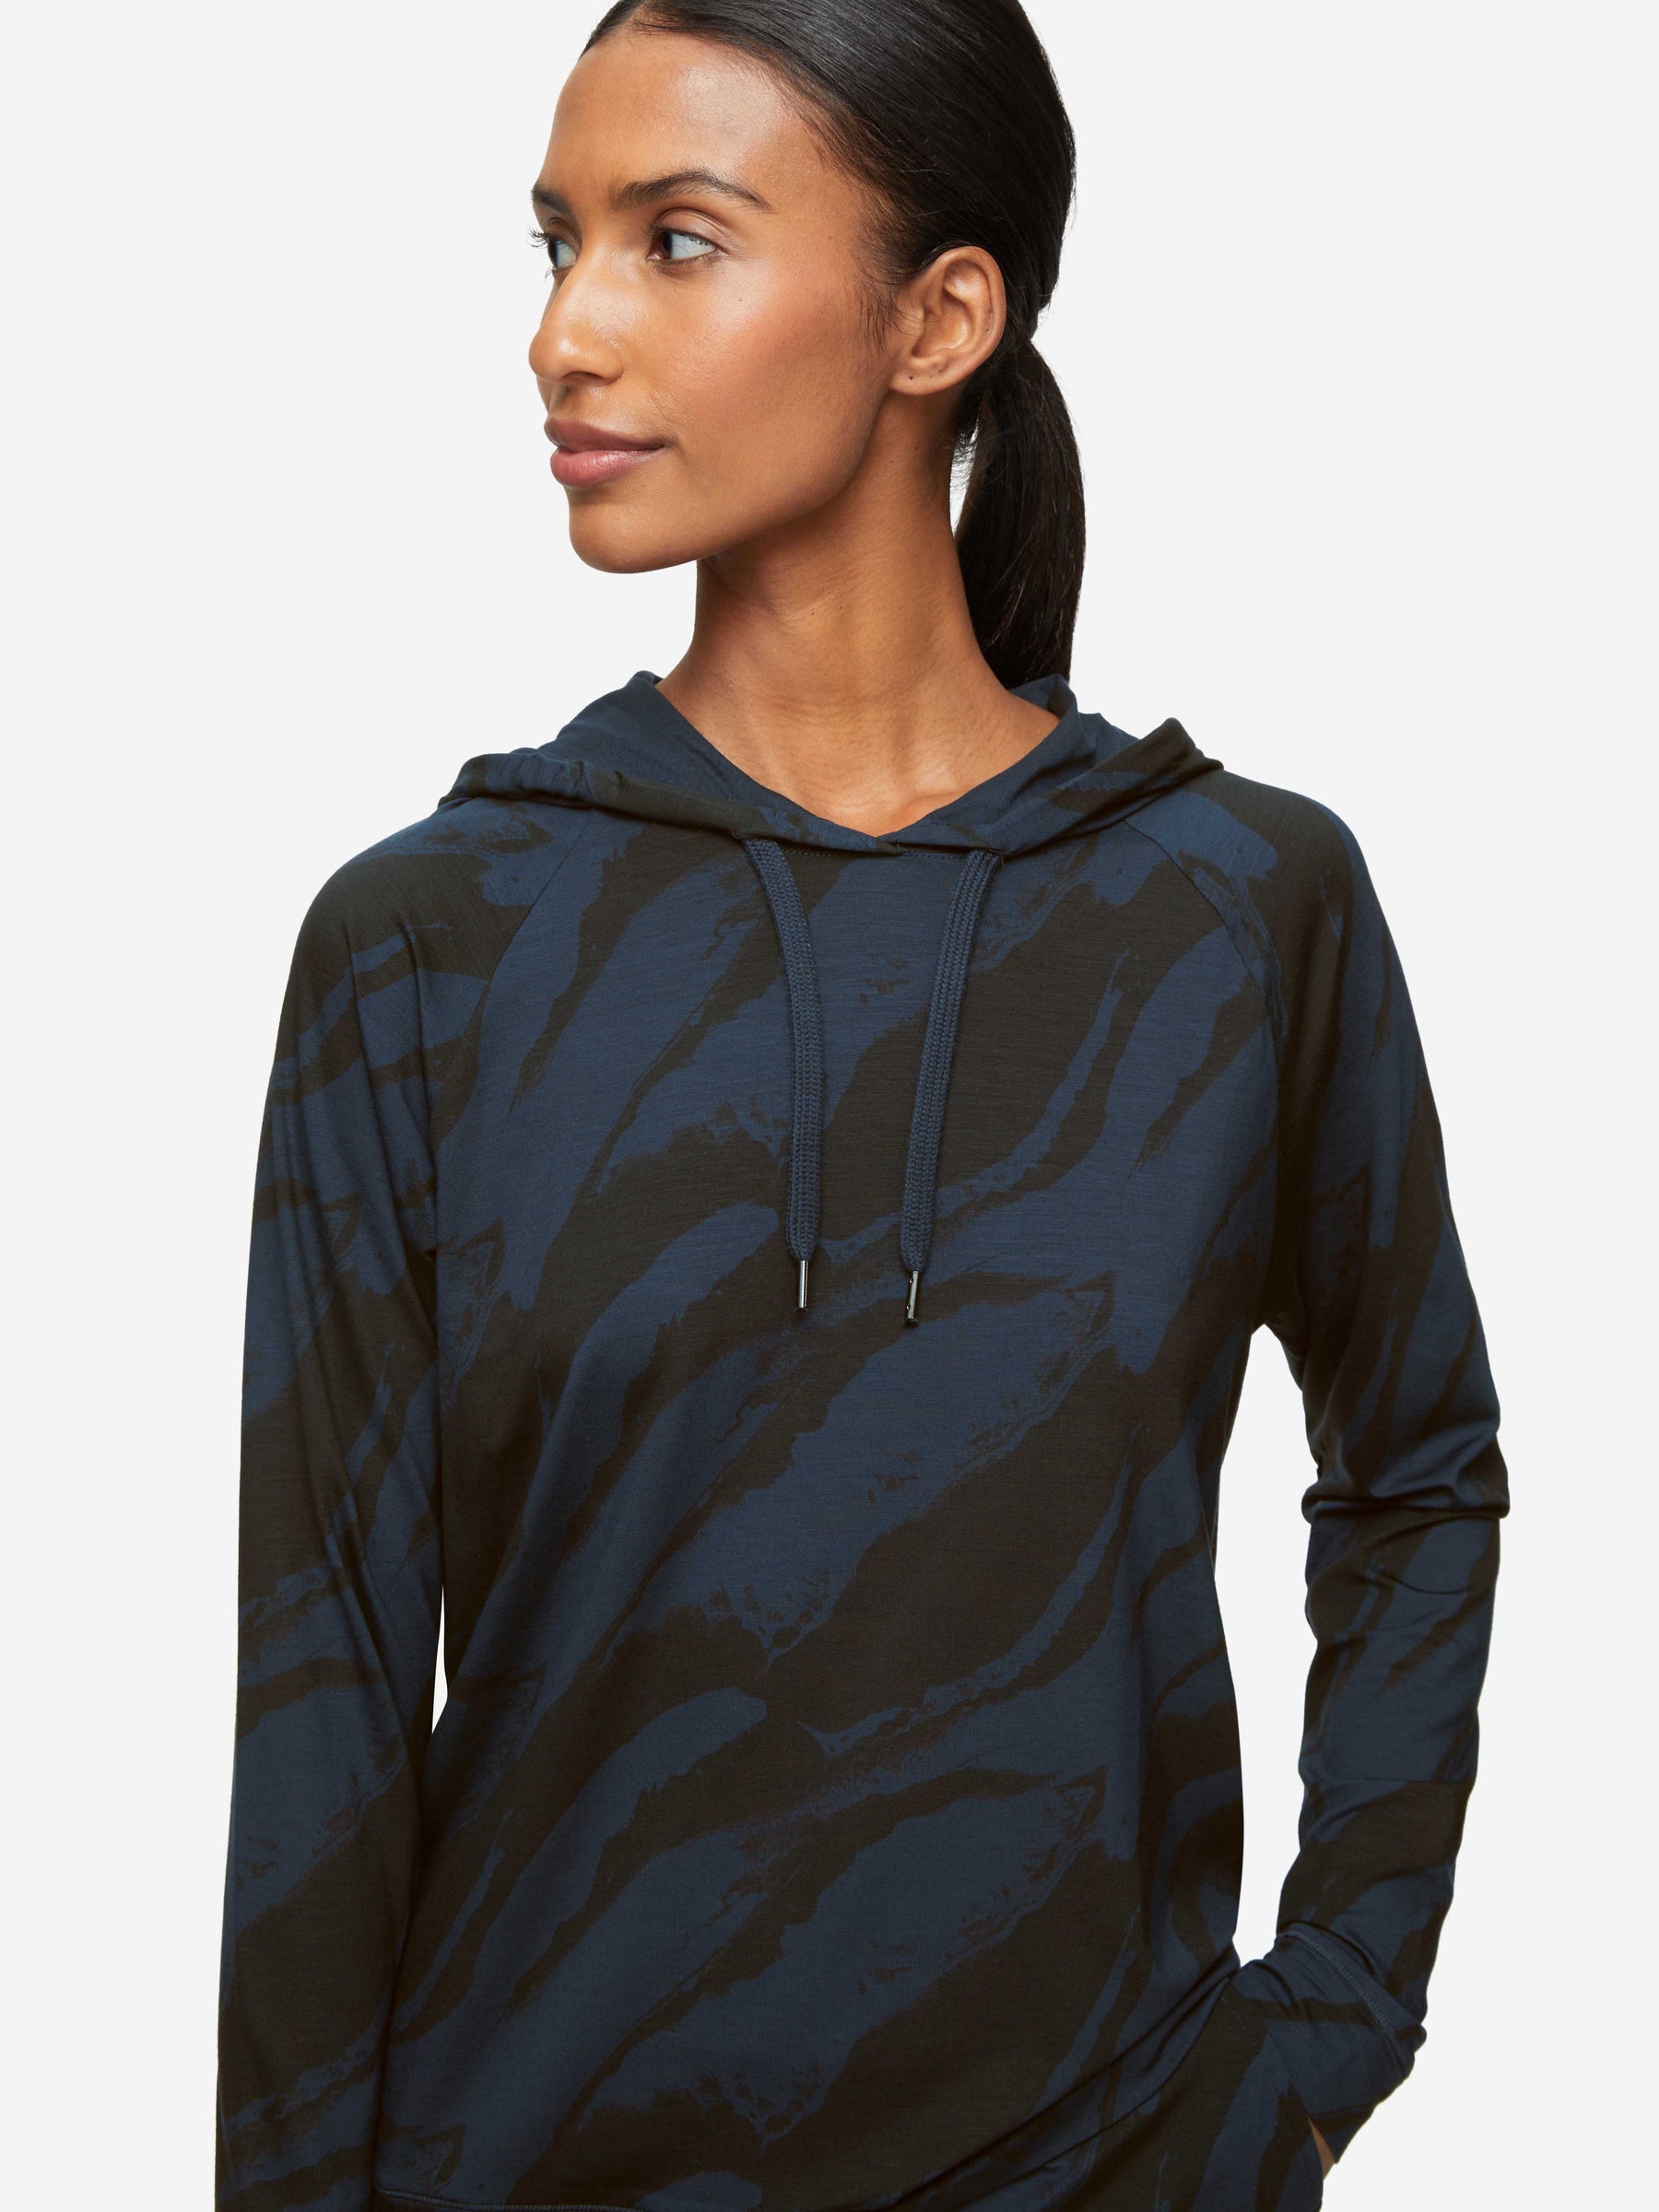 Women's Pullover Hoodie London 8 Micro Modal Stretch Navy